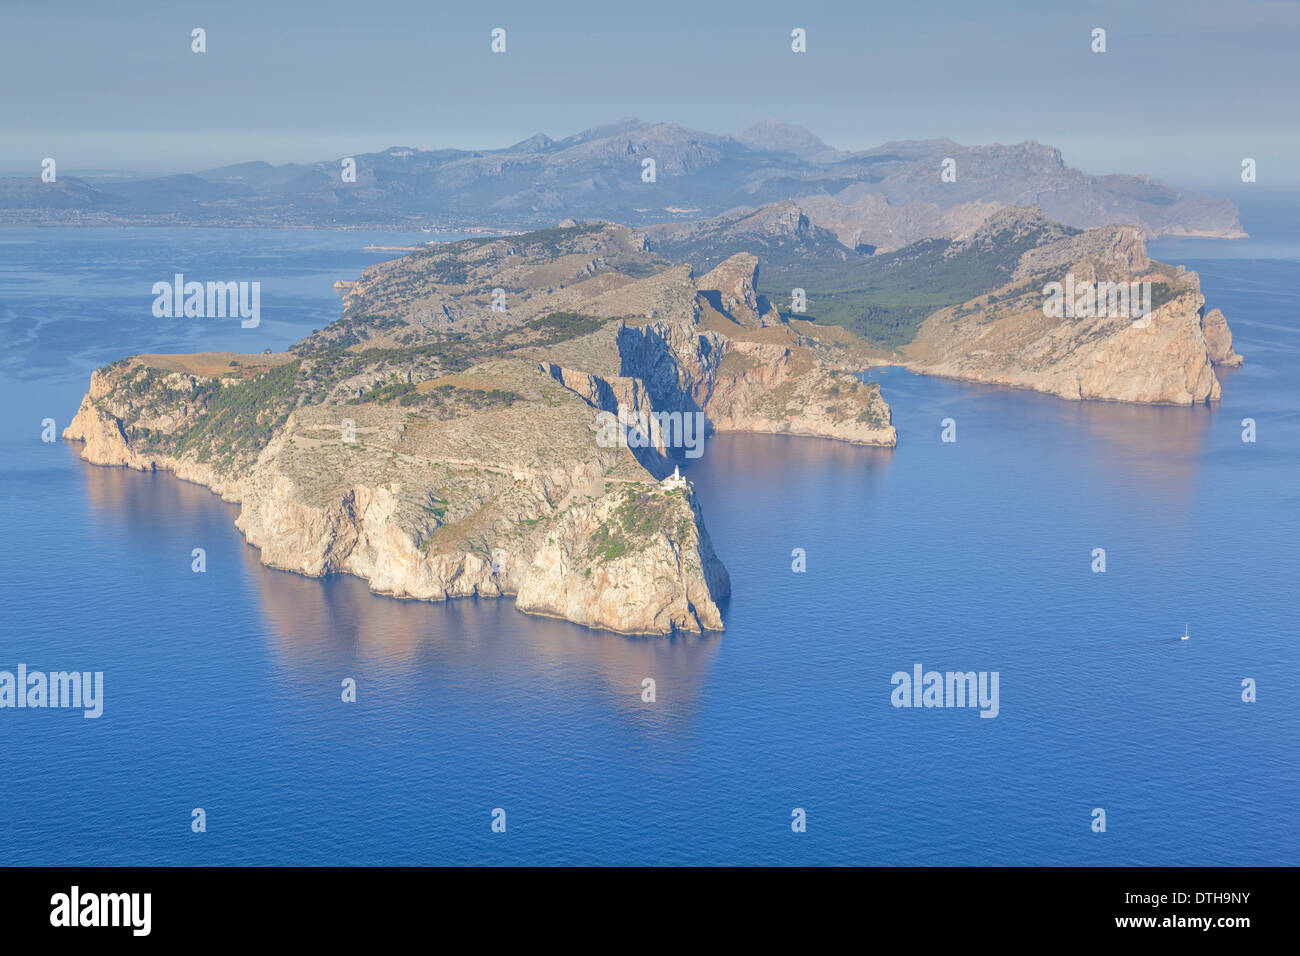 Aerial view of Majorca's northernmost point. Cap de Formentor and lighthouse. Pollensa area, Balearic islands, Spain Stock Photo